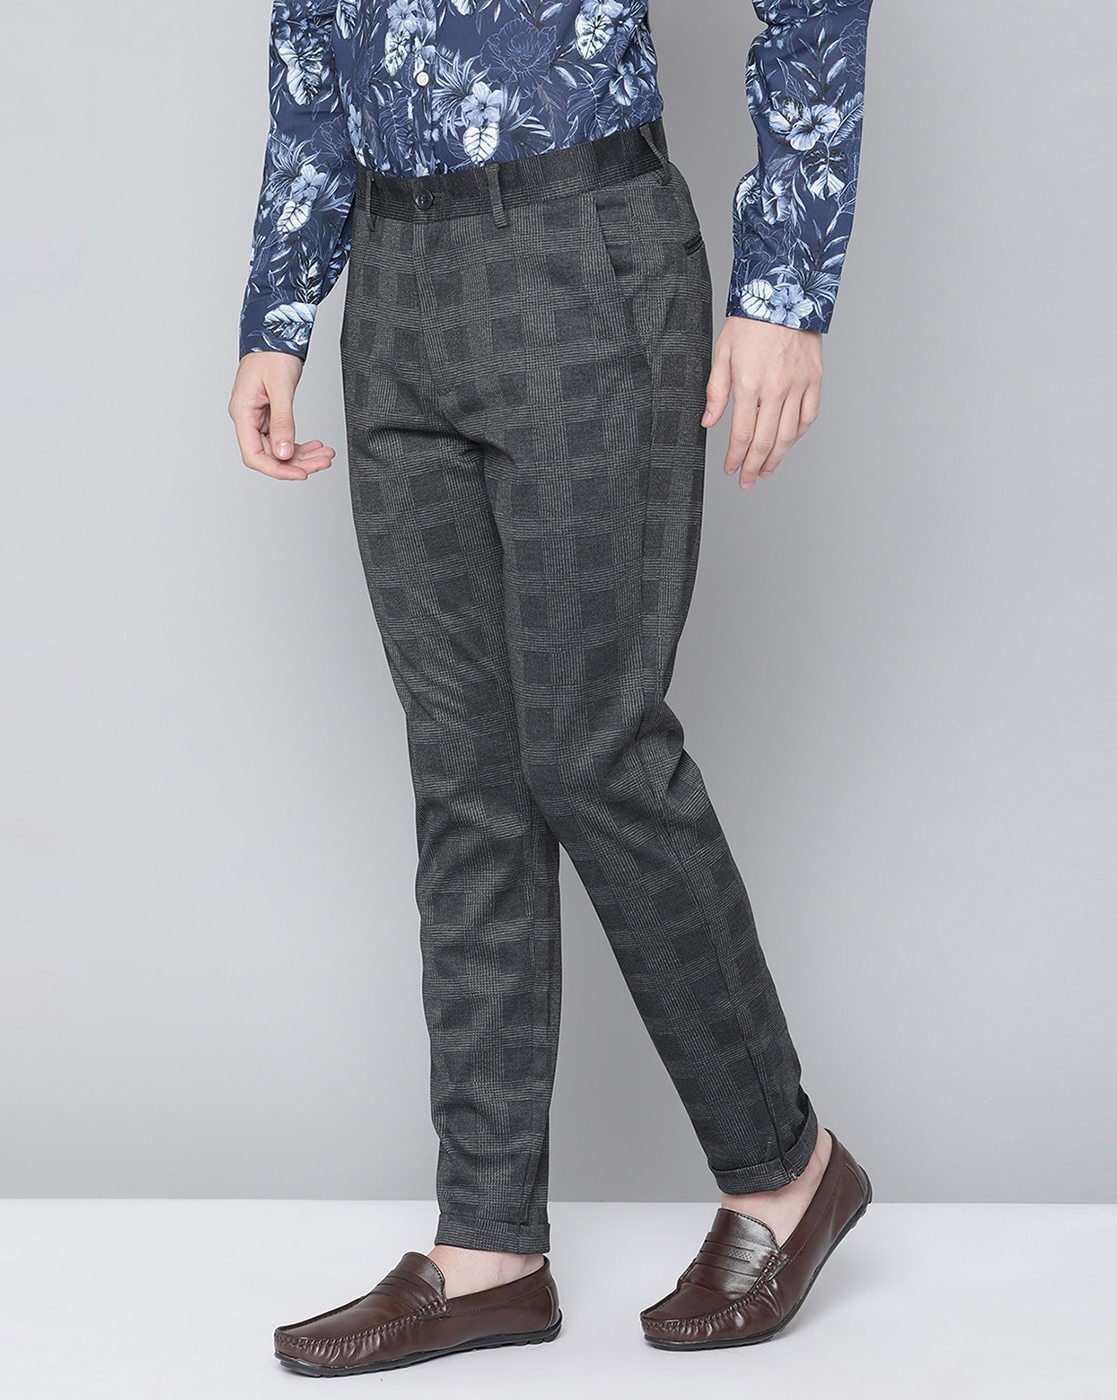 Buy Men Black Check Slim Fit Casual Trousers Online - 659626 | Peter England